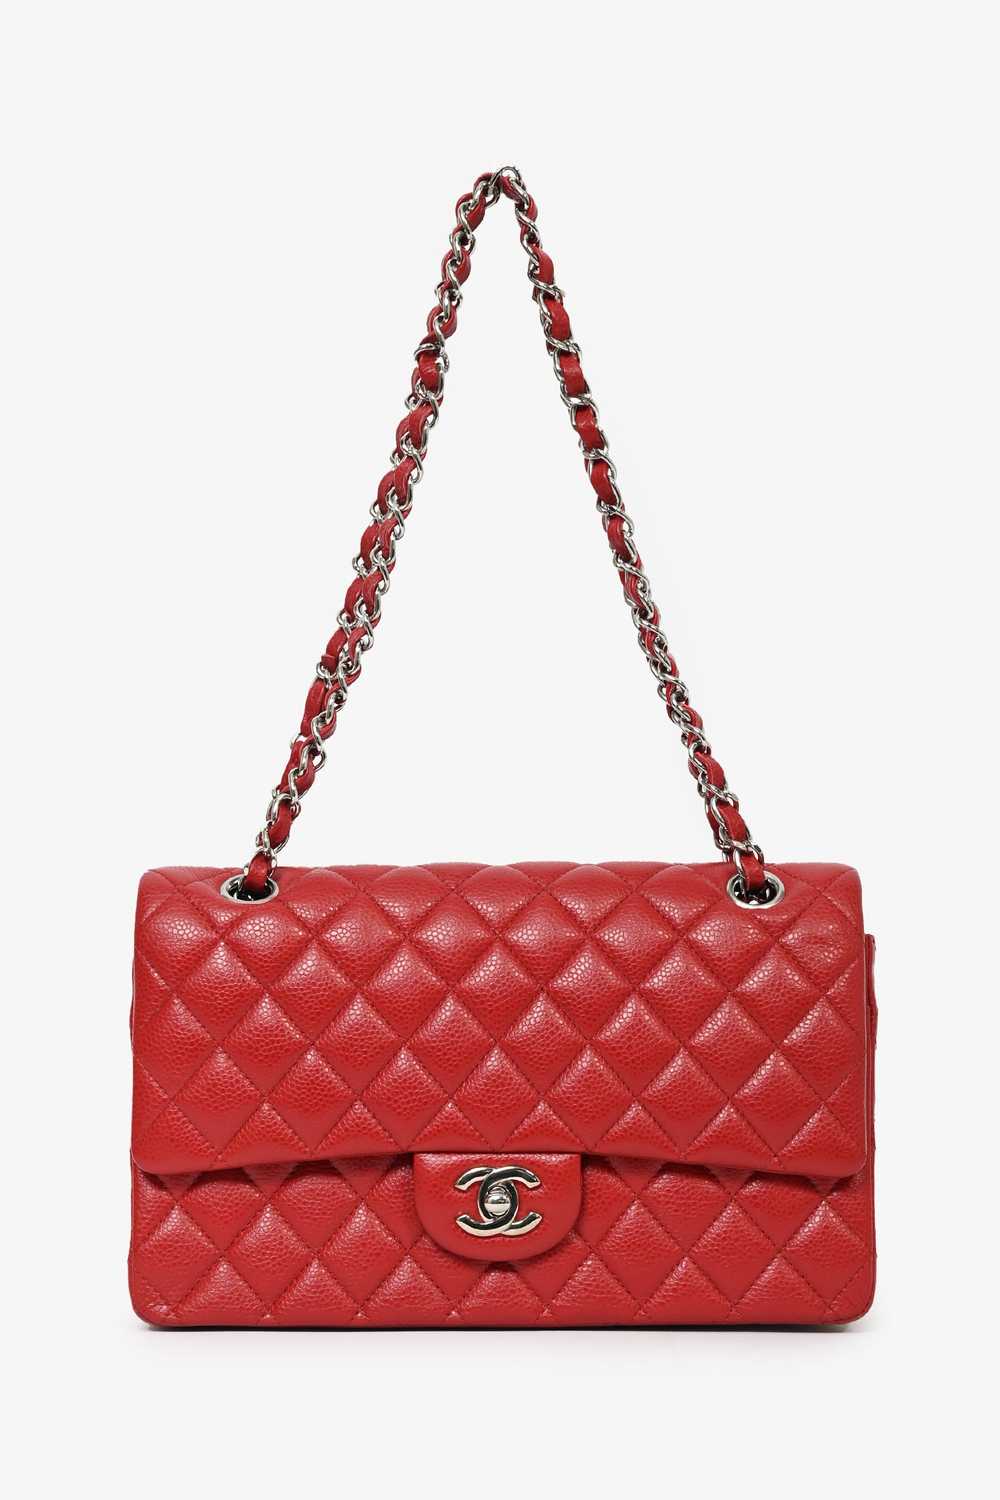 Pre-loved Chanel™ 2011 Red Caviar Leather Medium … - image 1